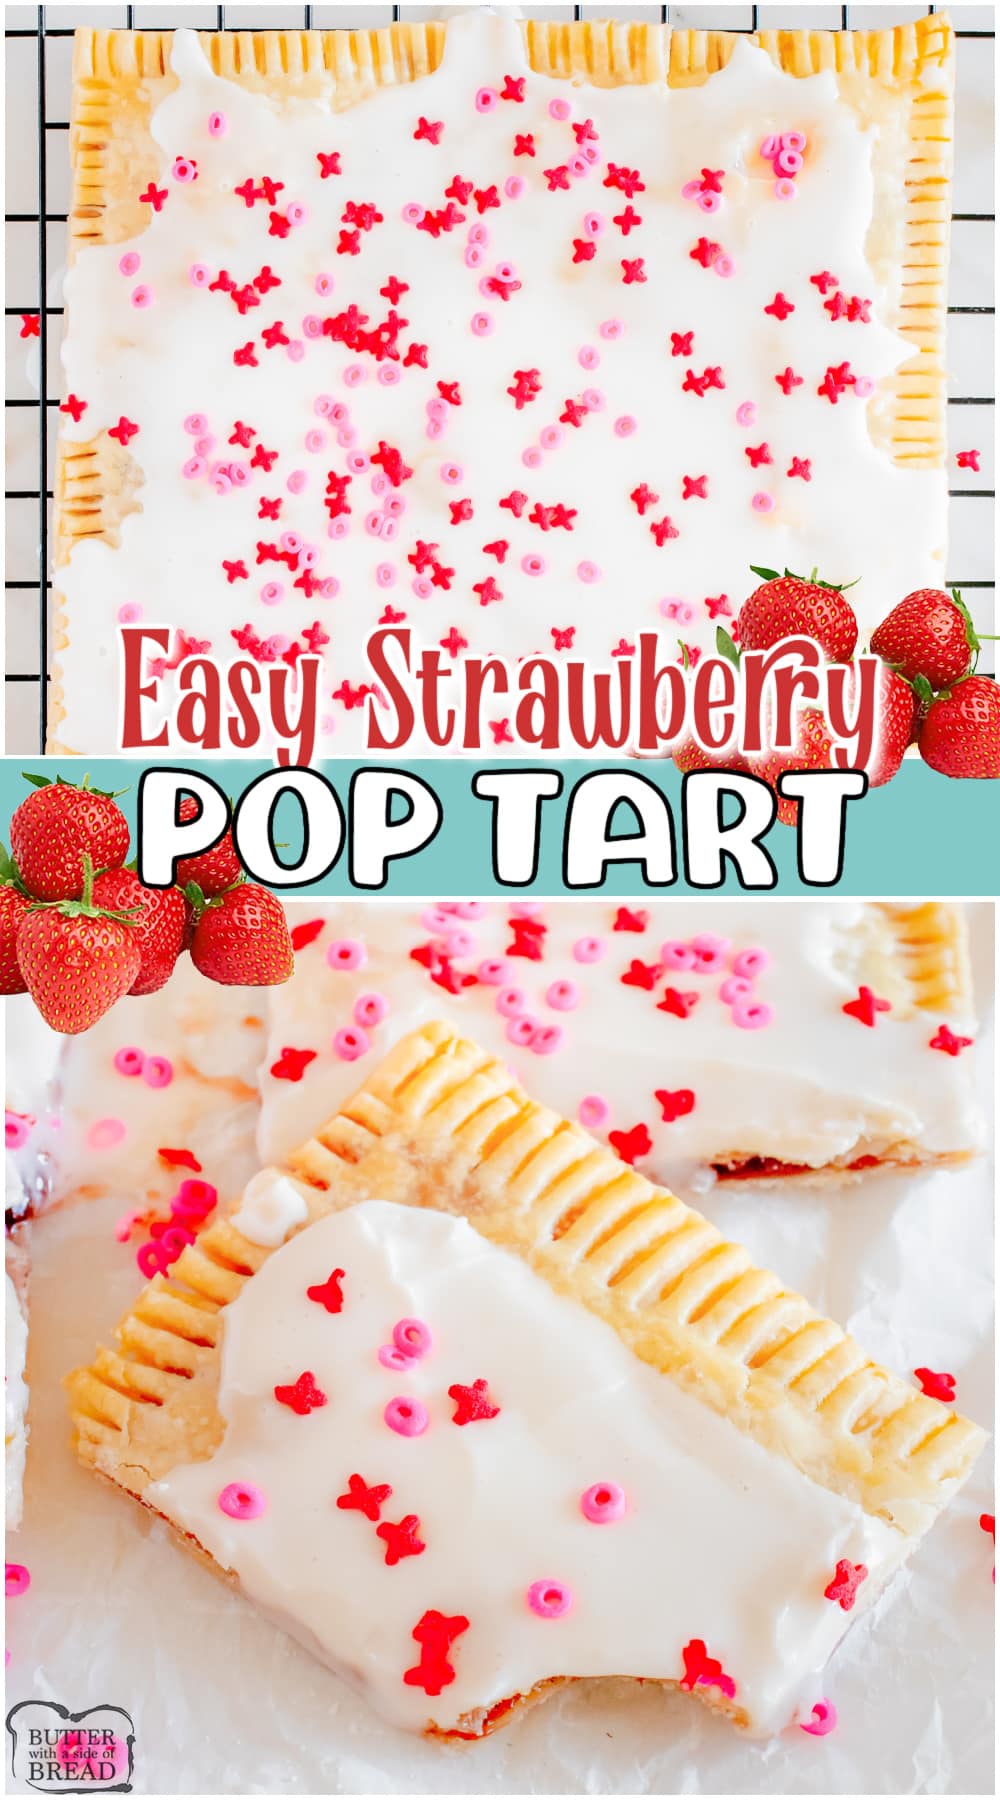 Nostalgic Strawberry Pop Tart made easy at home with just a handful of ingredients! Sweet strawberry jam is baked between layers of pie crust & topped with a simple vanilla glaze & sprinkles! 